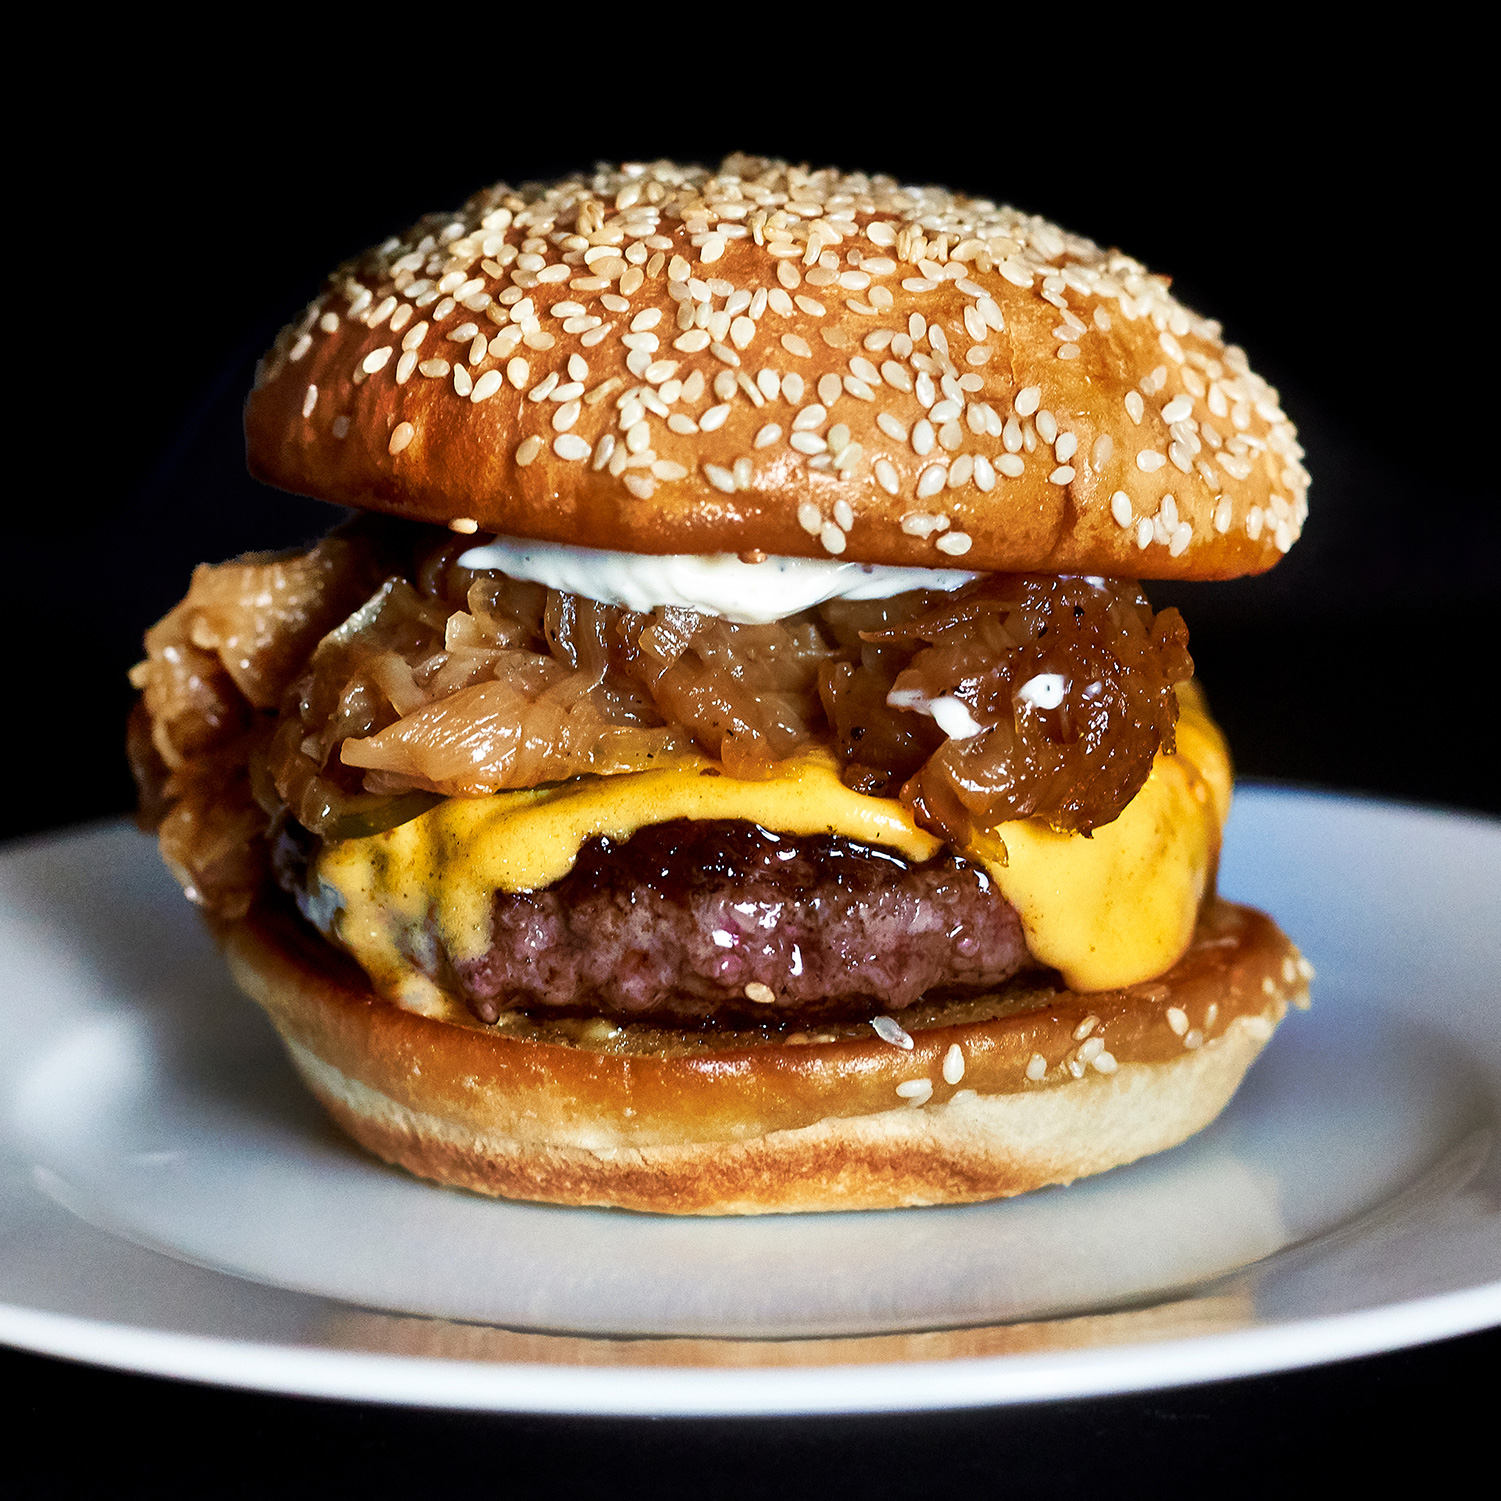 A Richard Eaglespoon burger on a black background and also on a plate. Featuring more caramelized onions than sense.